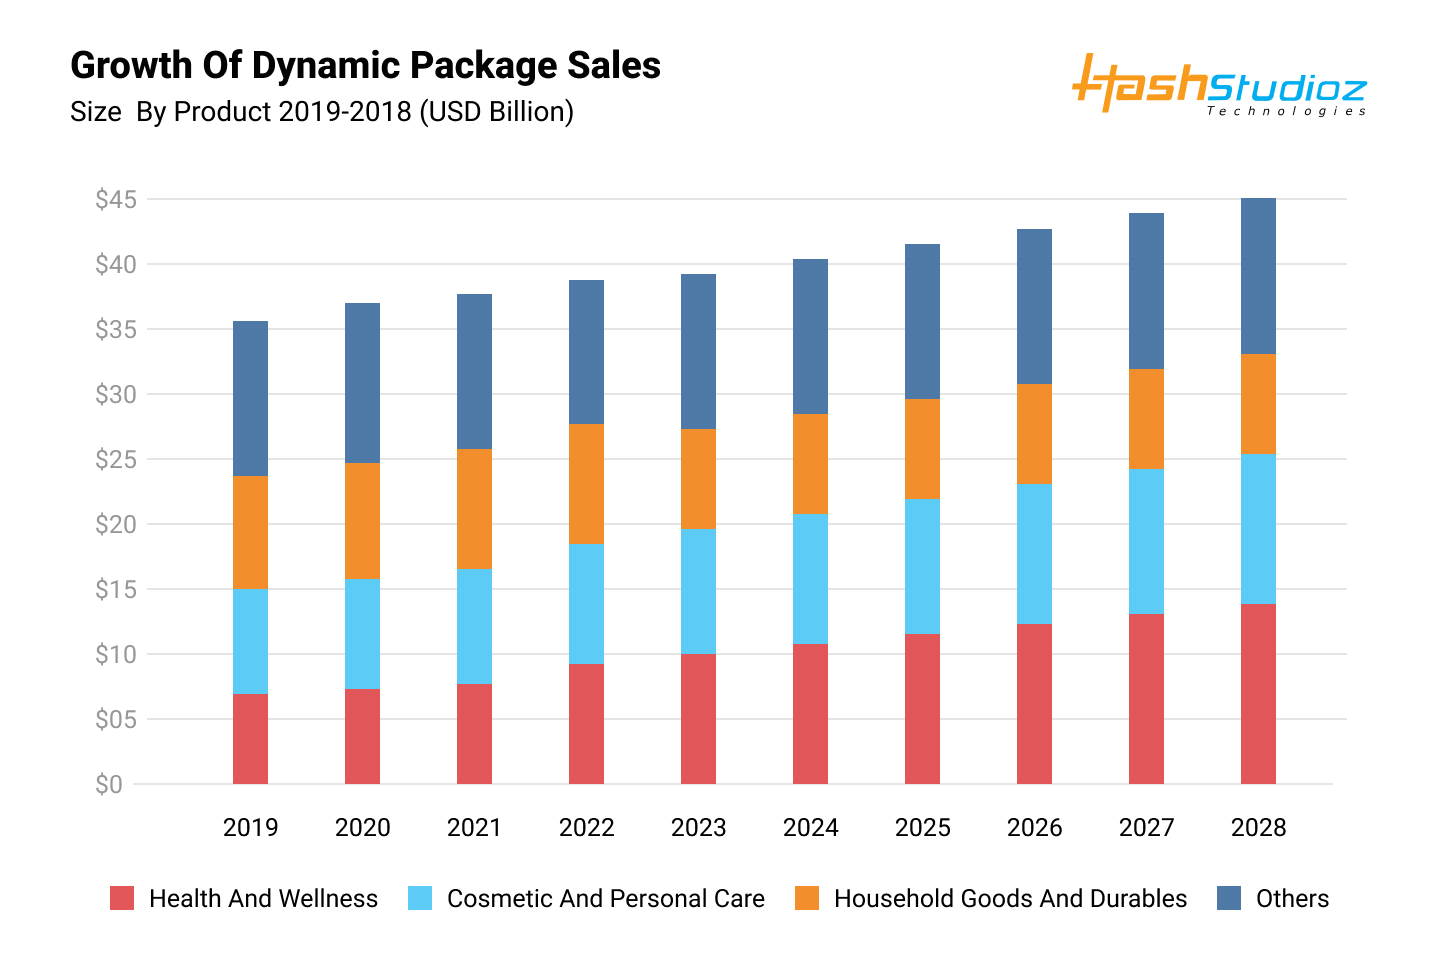 Growth of Dynamic Packaging Sales